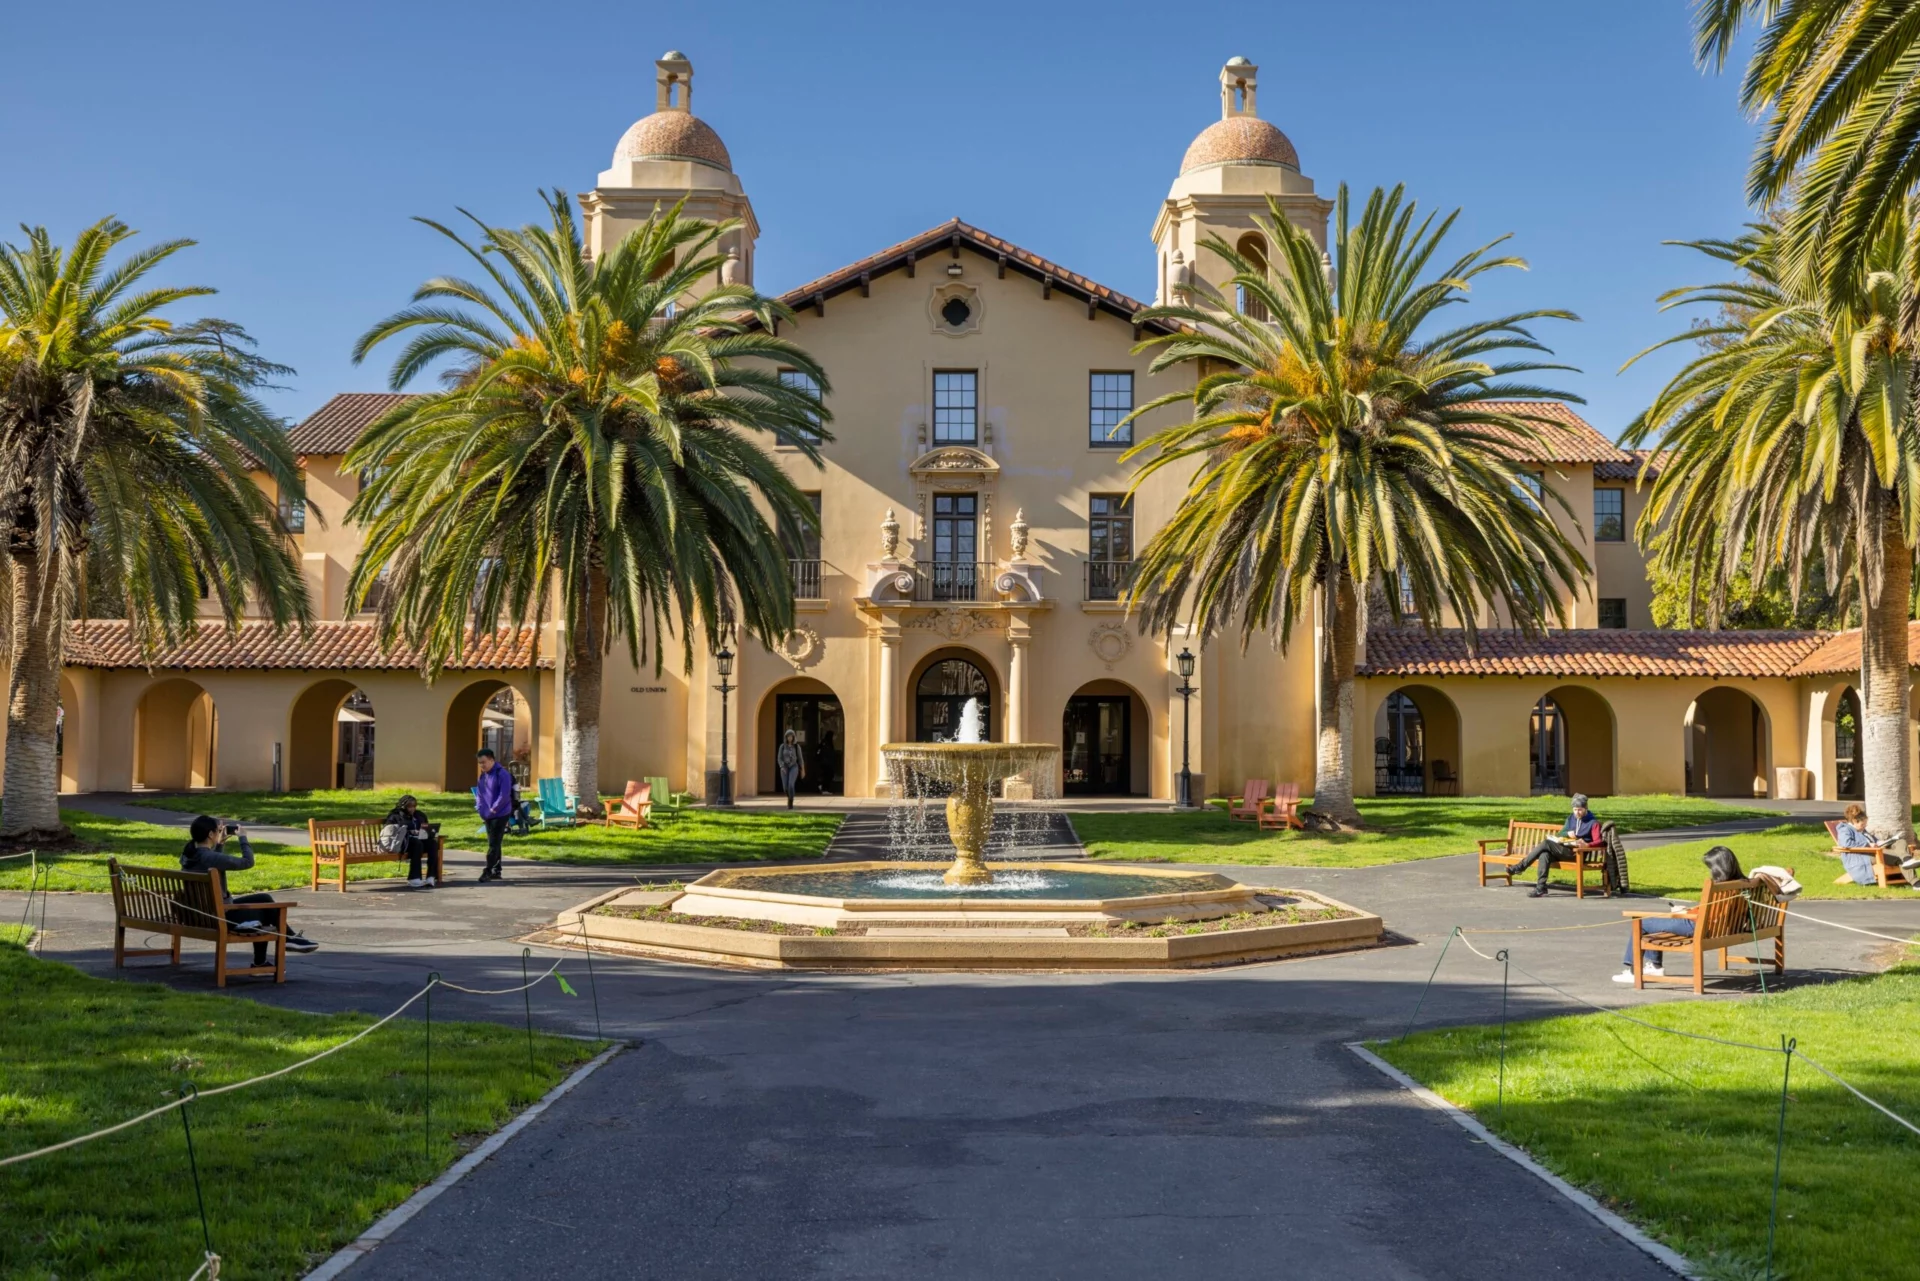 List of Private Universities in California, Acceptance Rates & Other Details